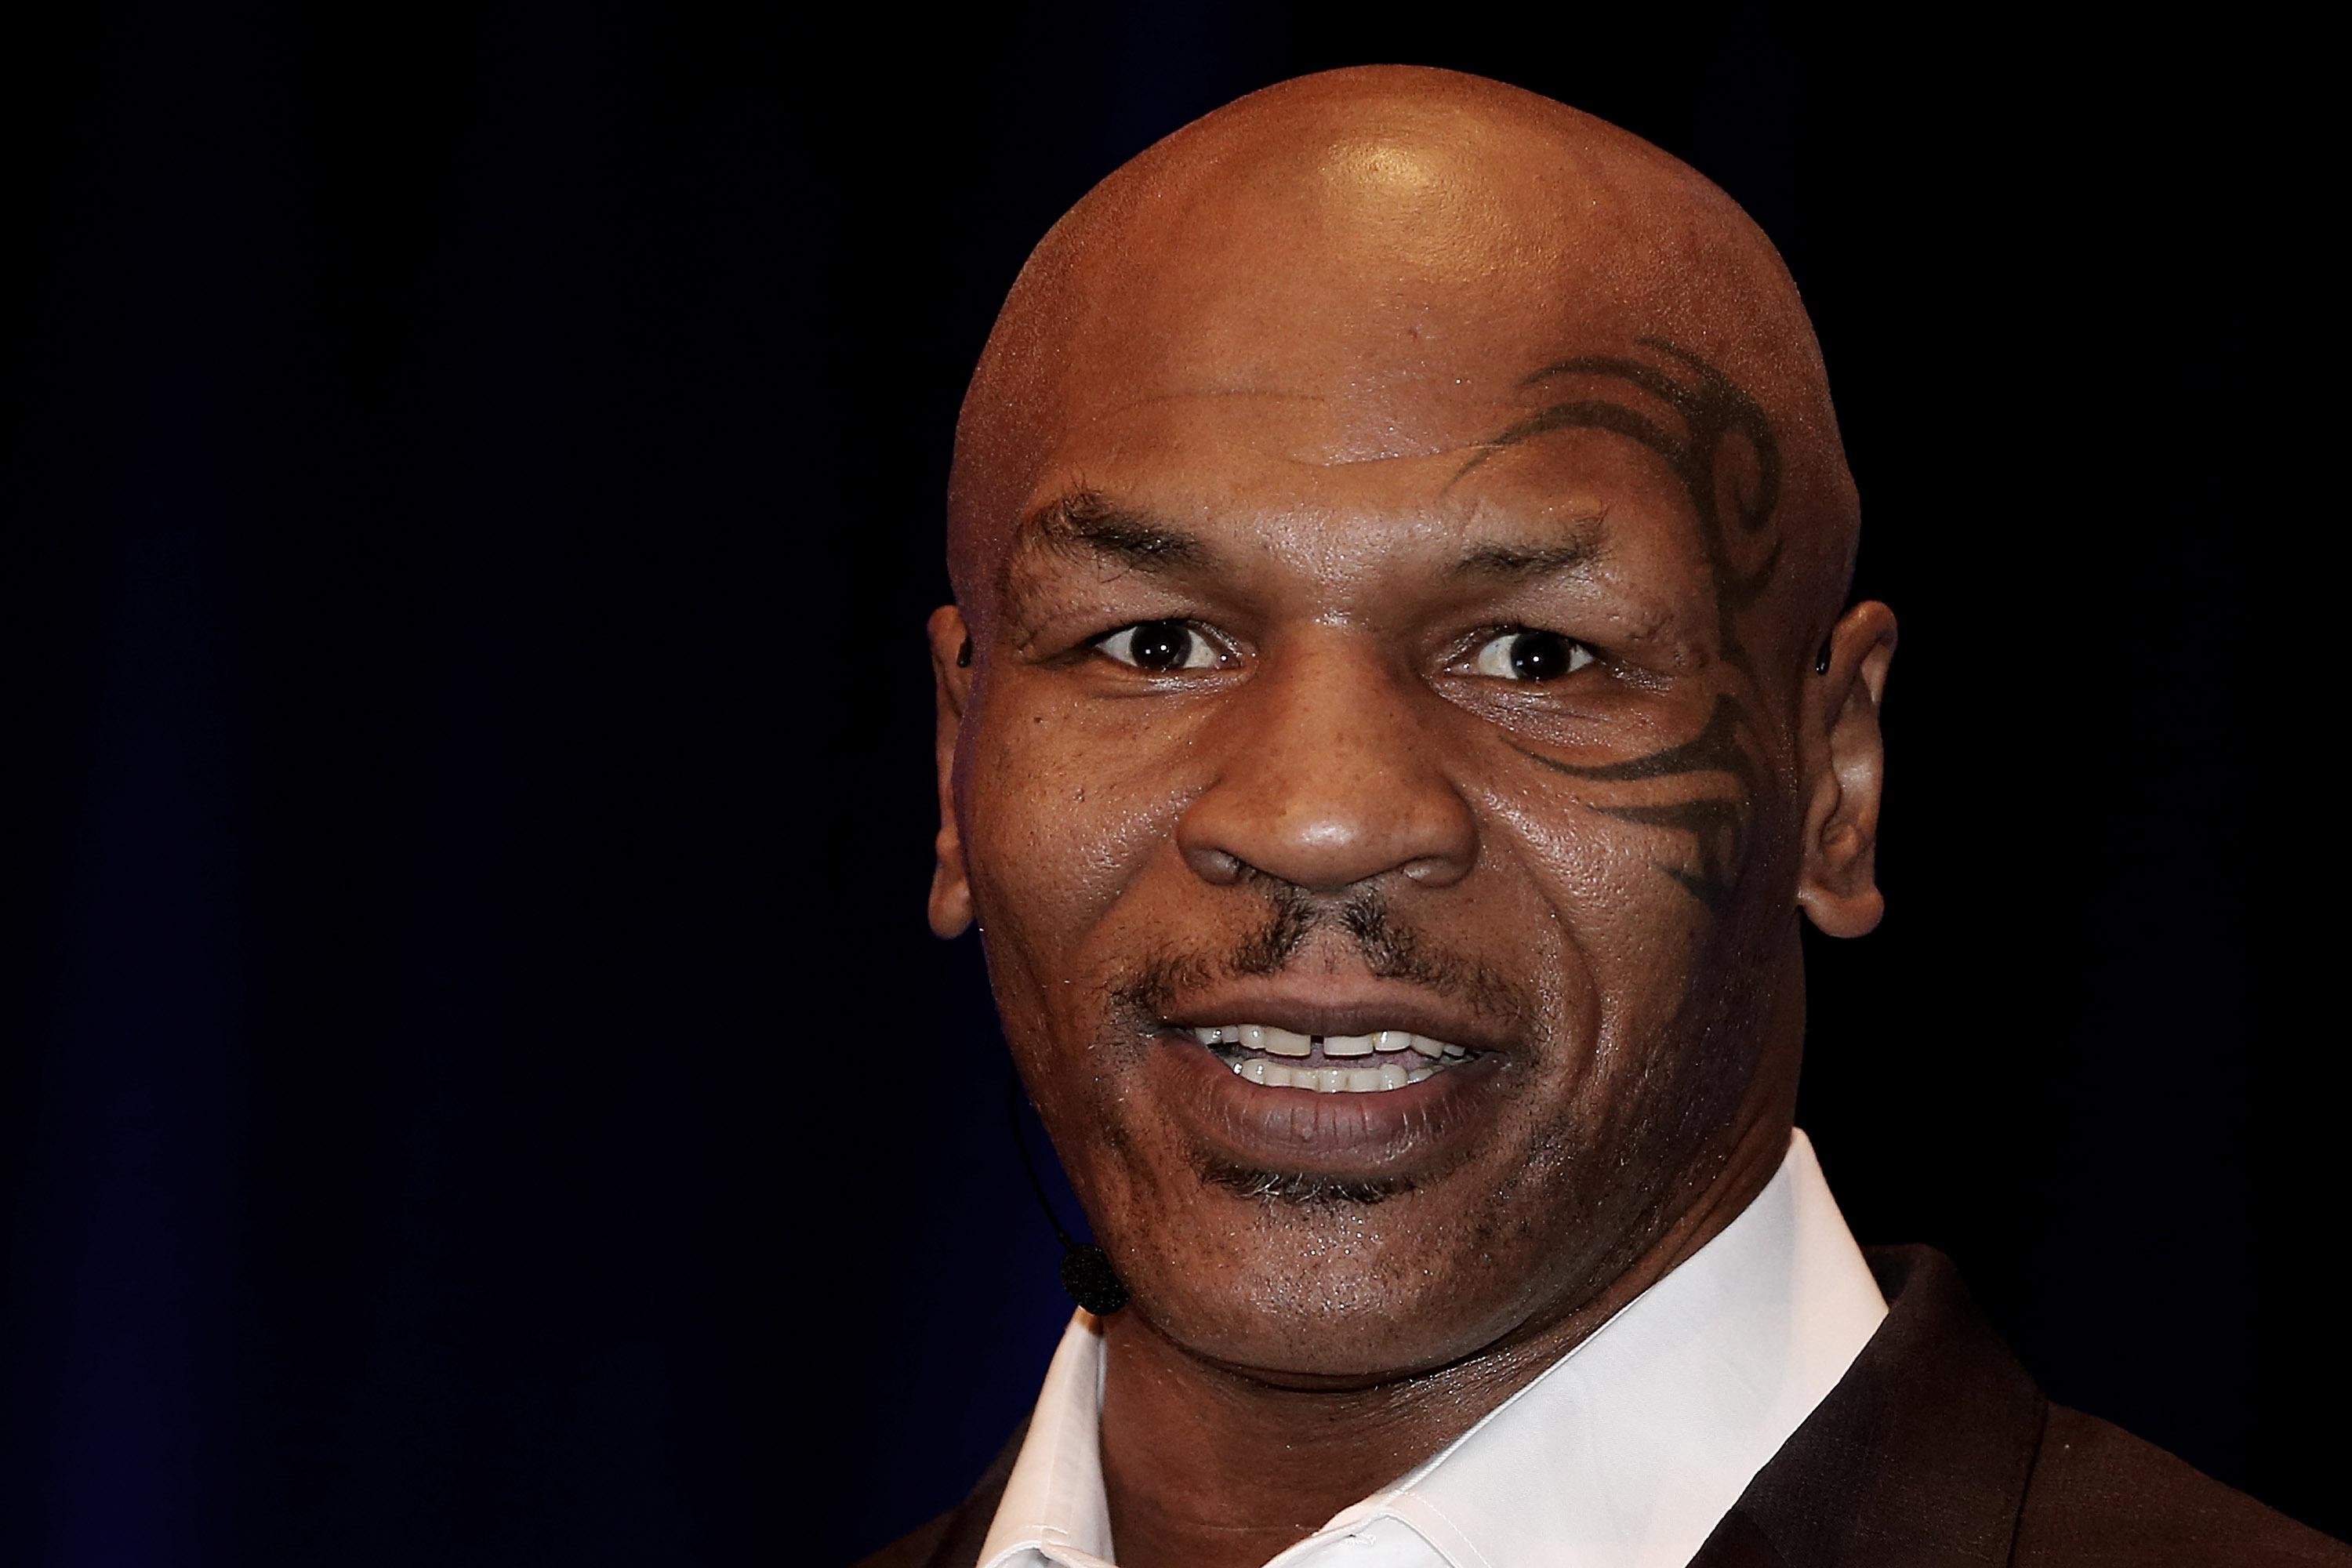 3000 x 2000 · jpeg - Mike Tyson HD wallpapers free download